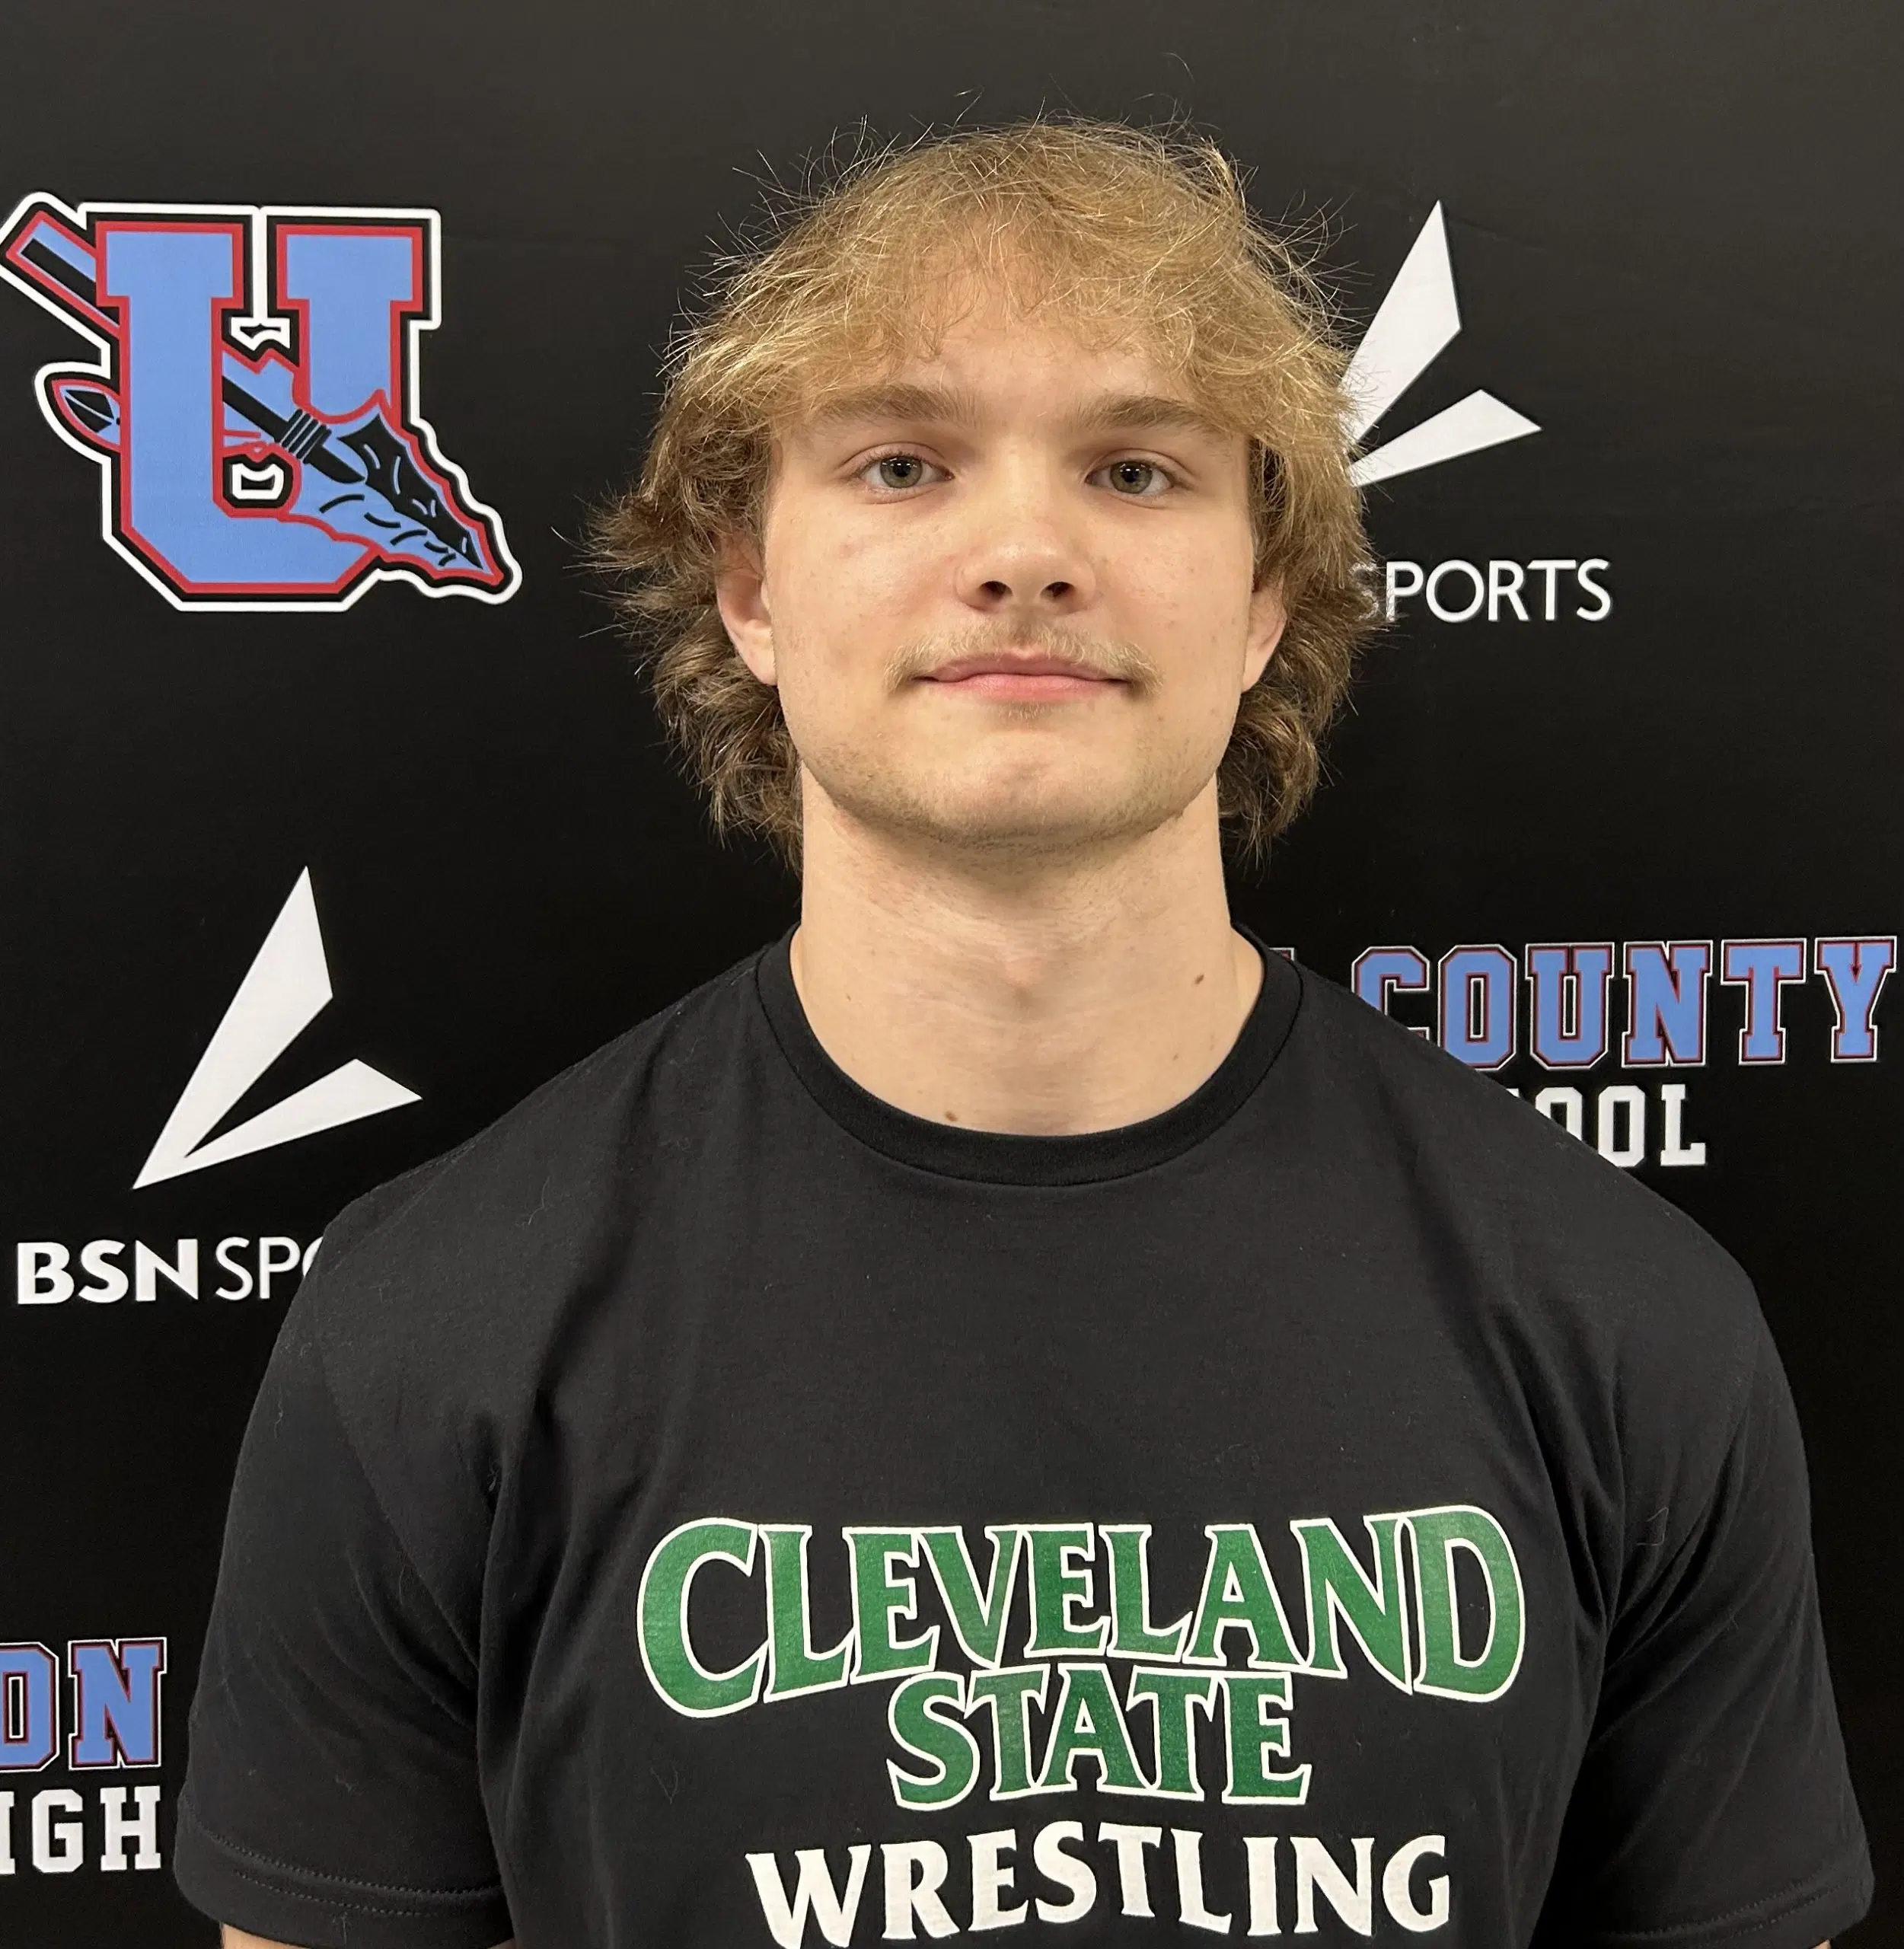 Union County Wrestler Gavin Ricketts Commits to Cleveland State University